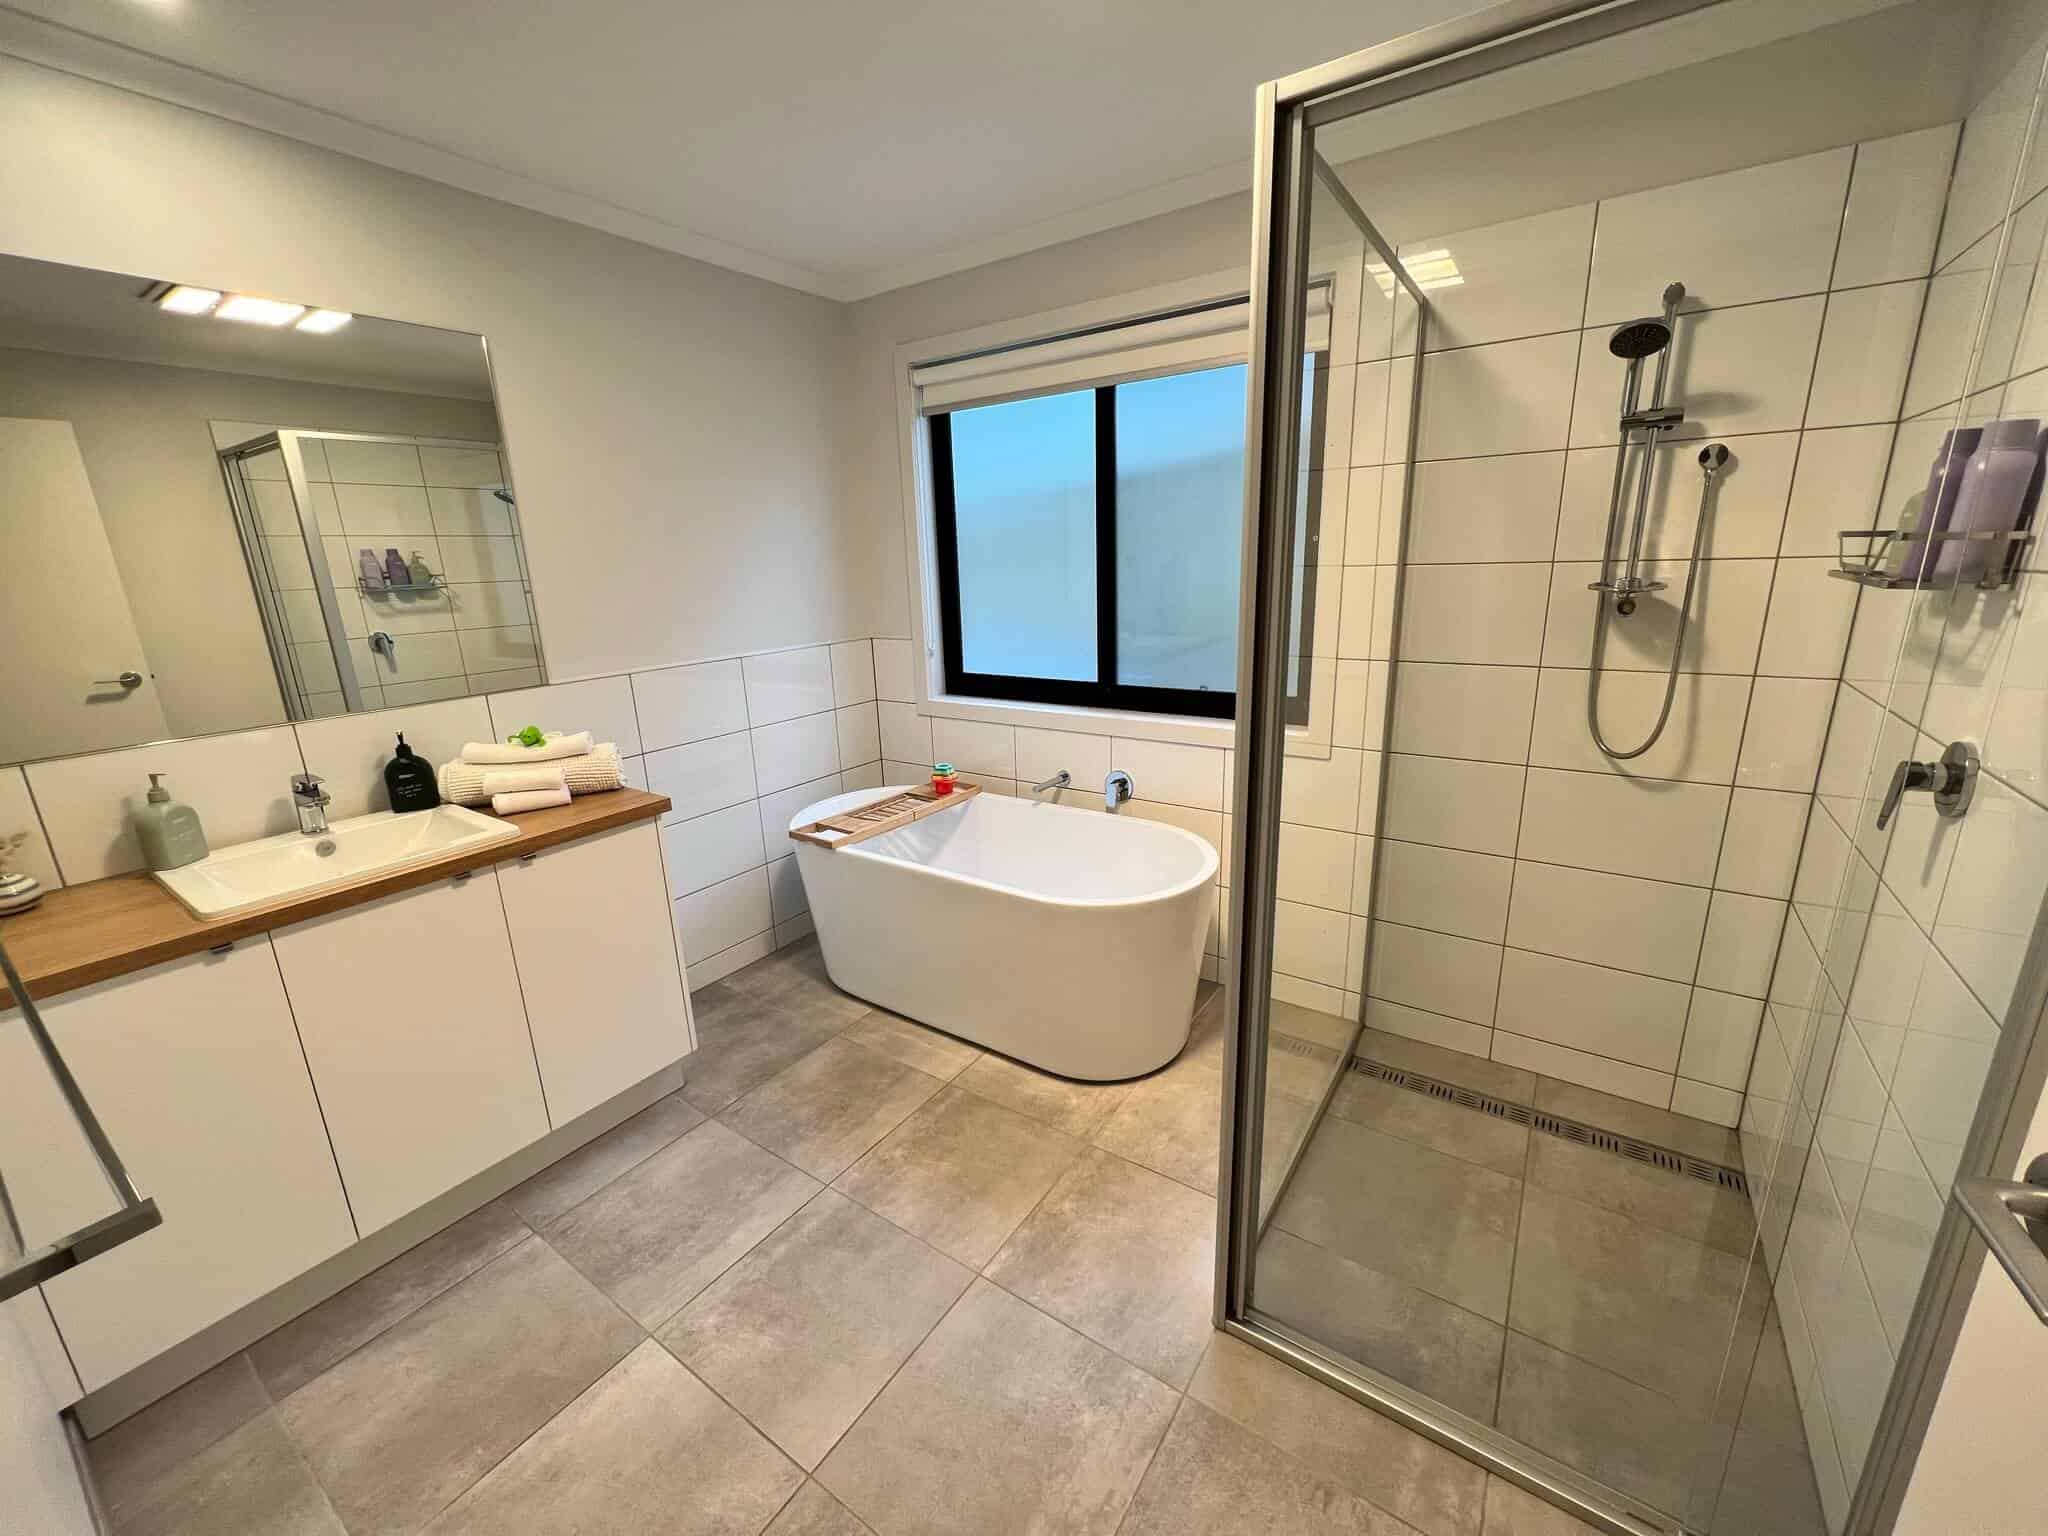 Bathroom with freestanding bath tub and shower